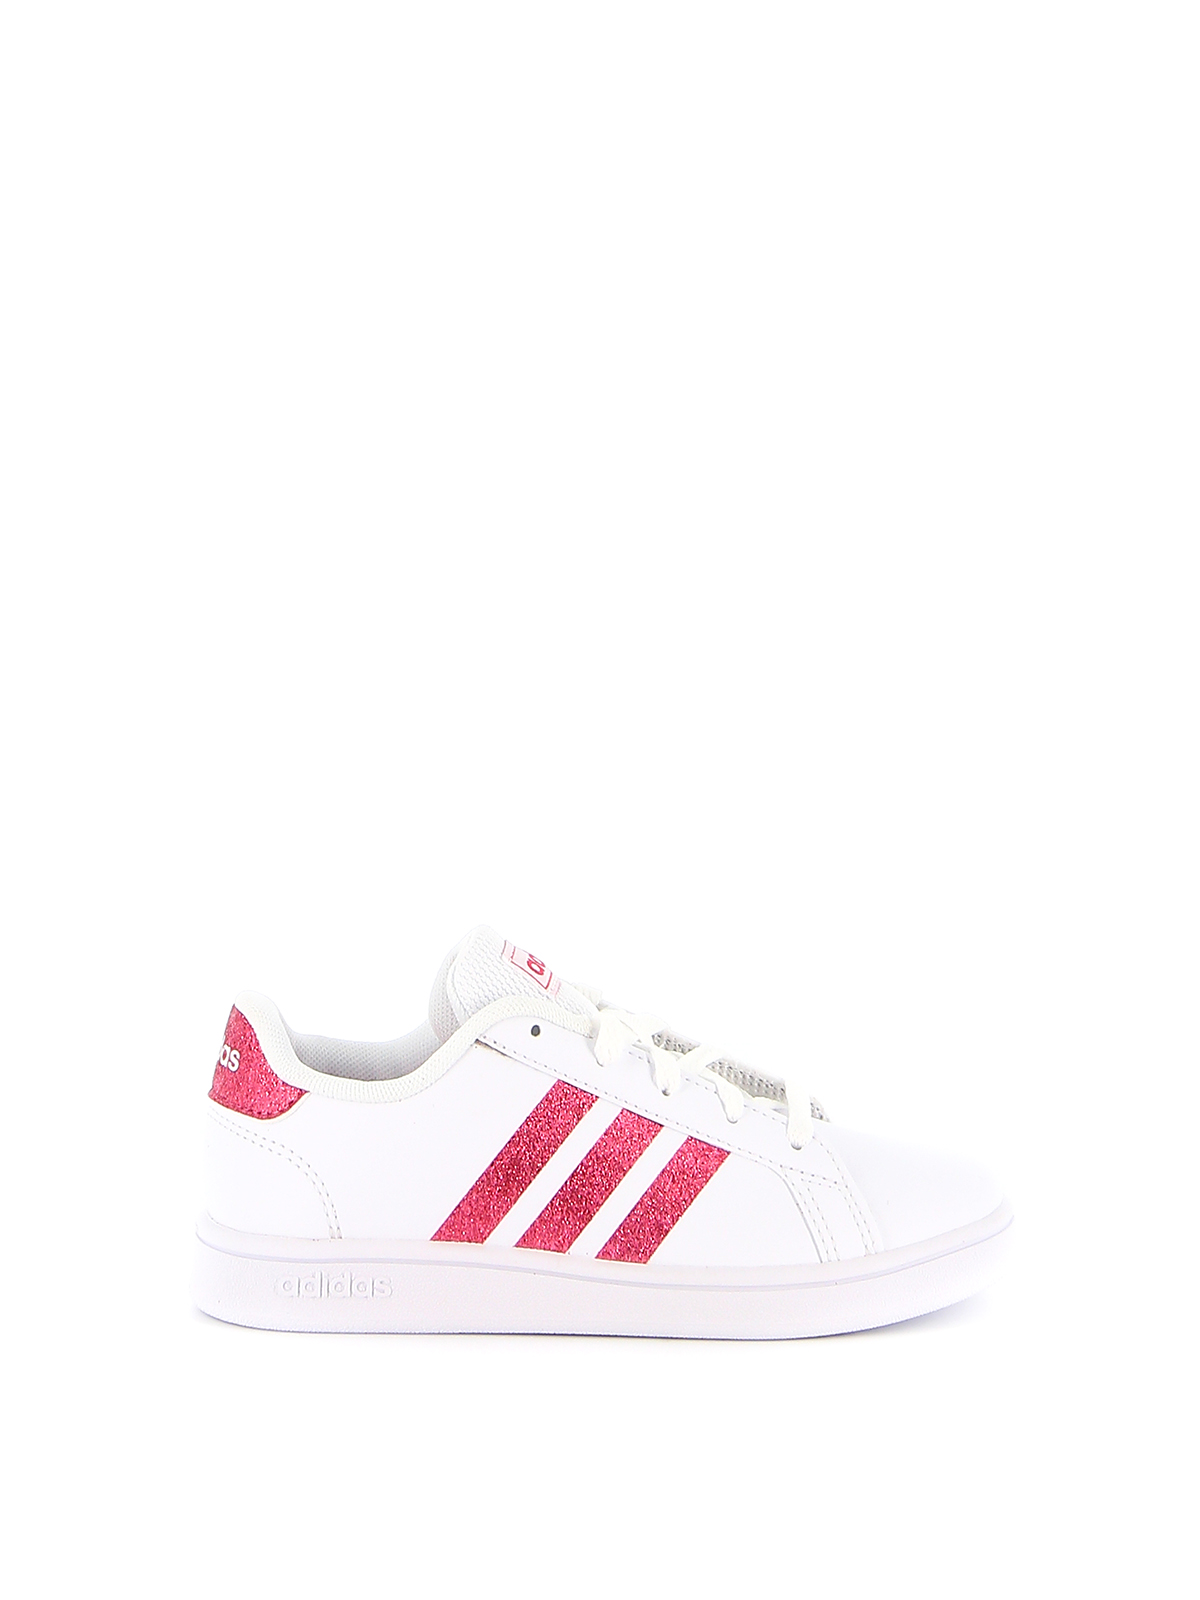 Adidas Grand Court K Pink Cheap Sale, UP TO 70% OFF